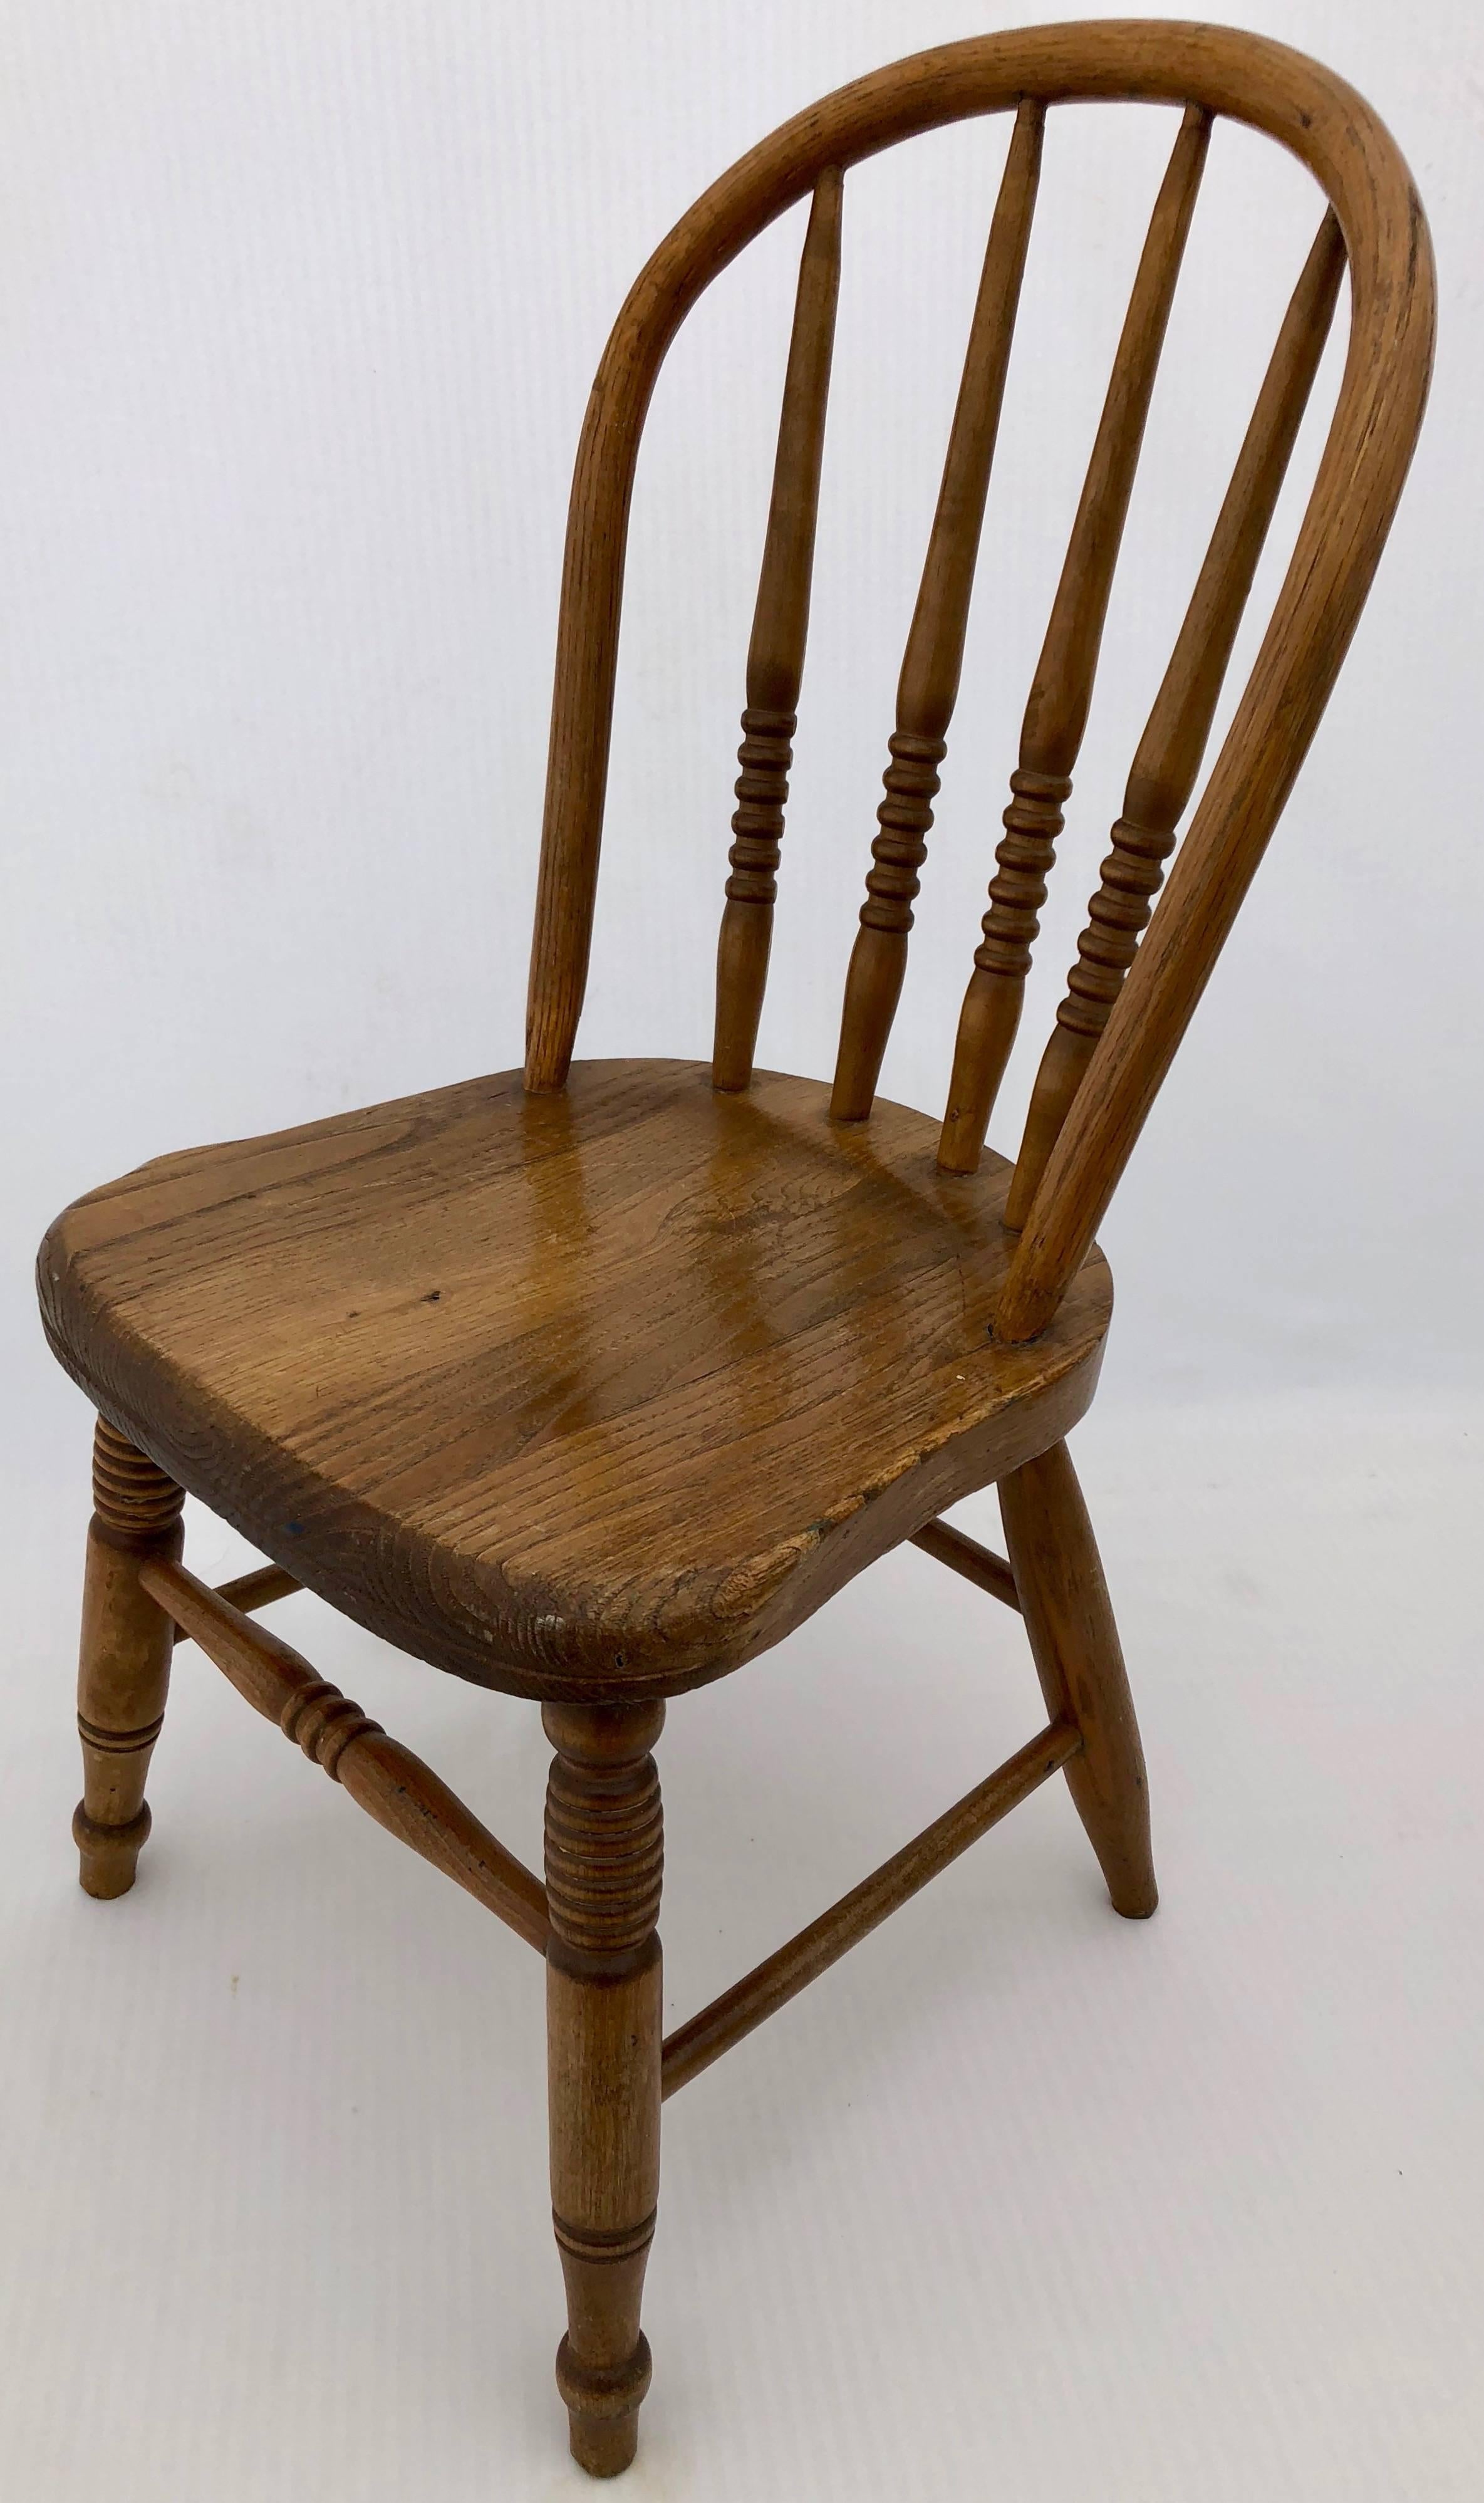 Modern Set of Four Wooden Children's Chairs with Spindle and Rounded Backs, 1900s For Sale